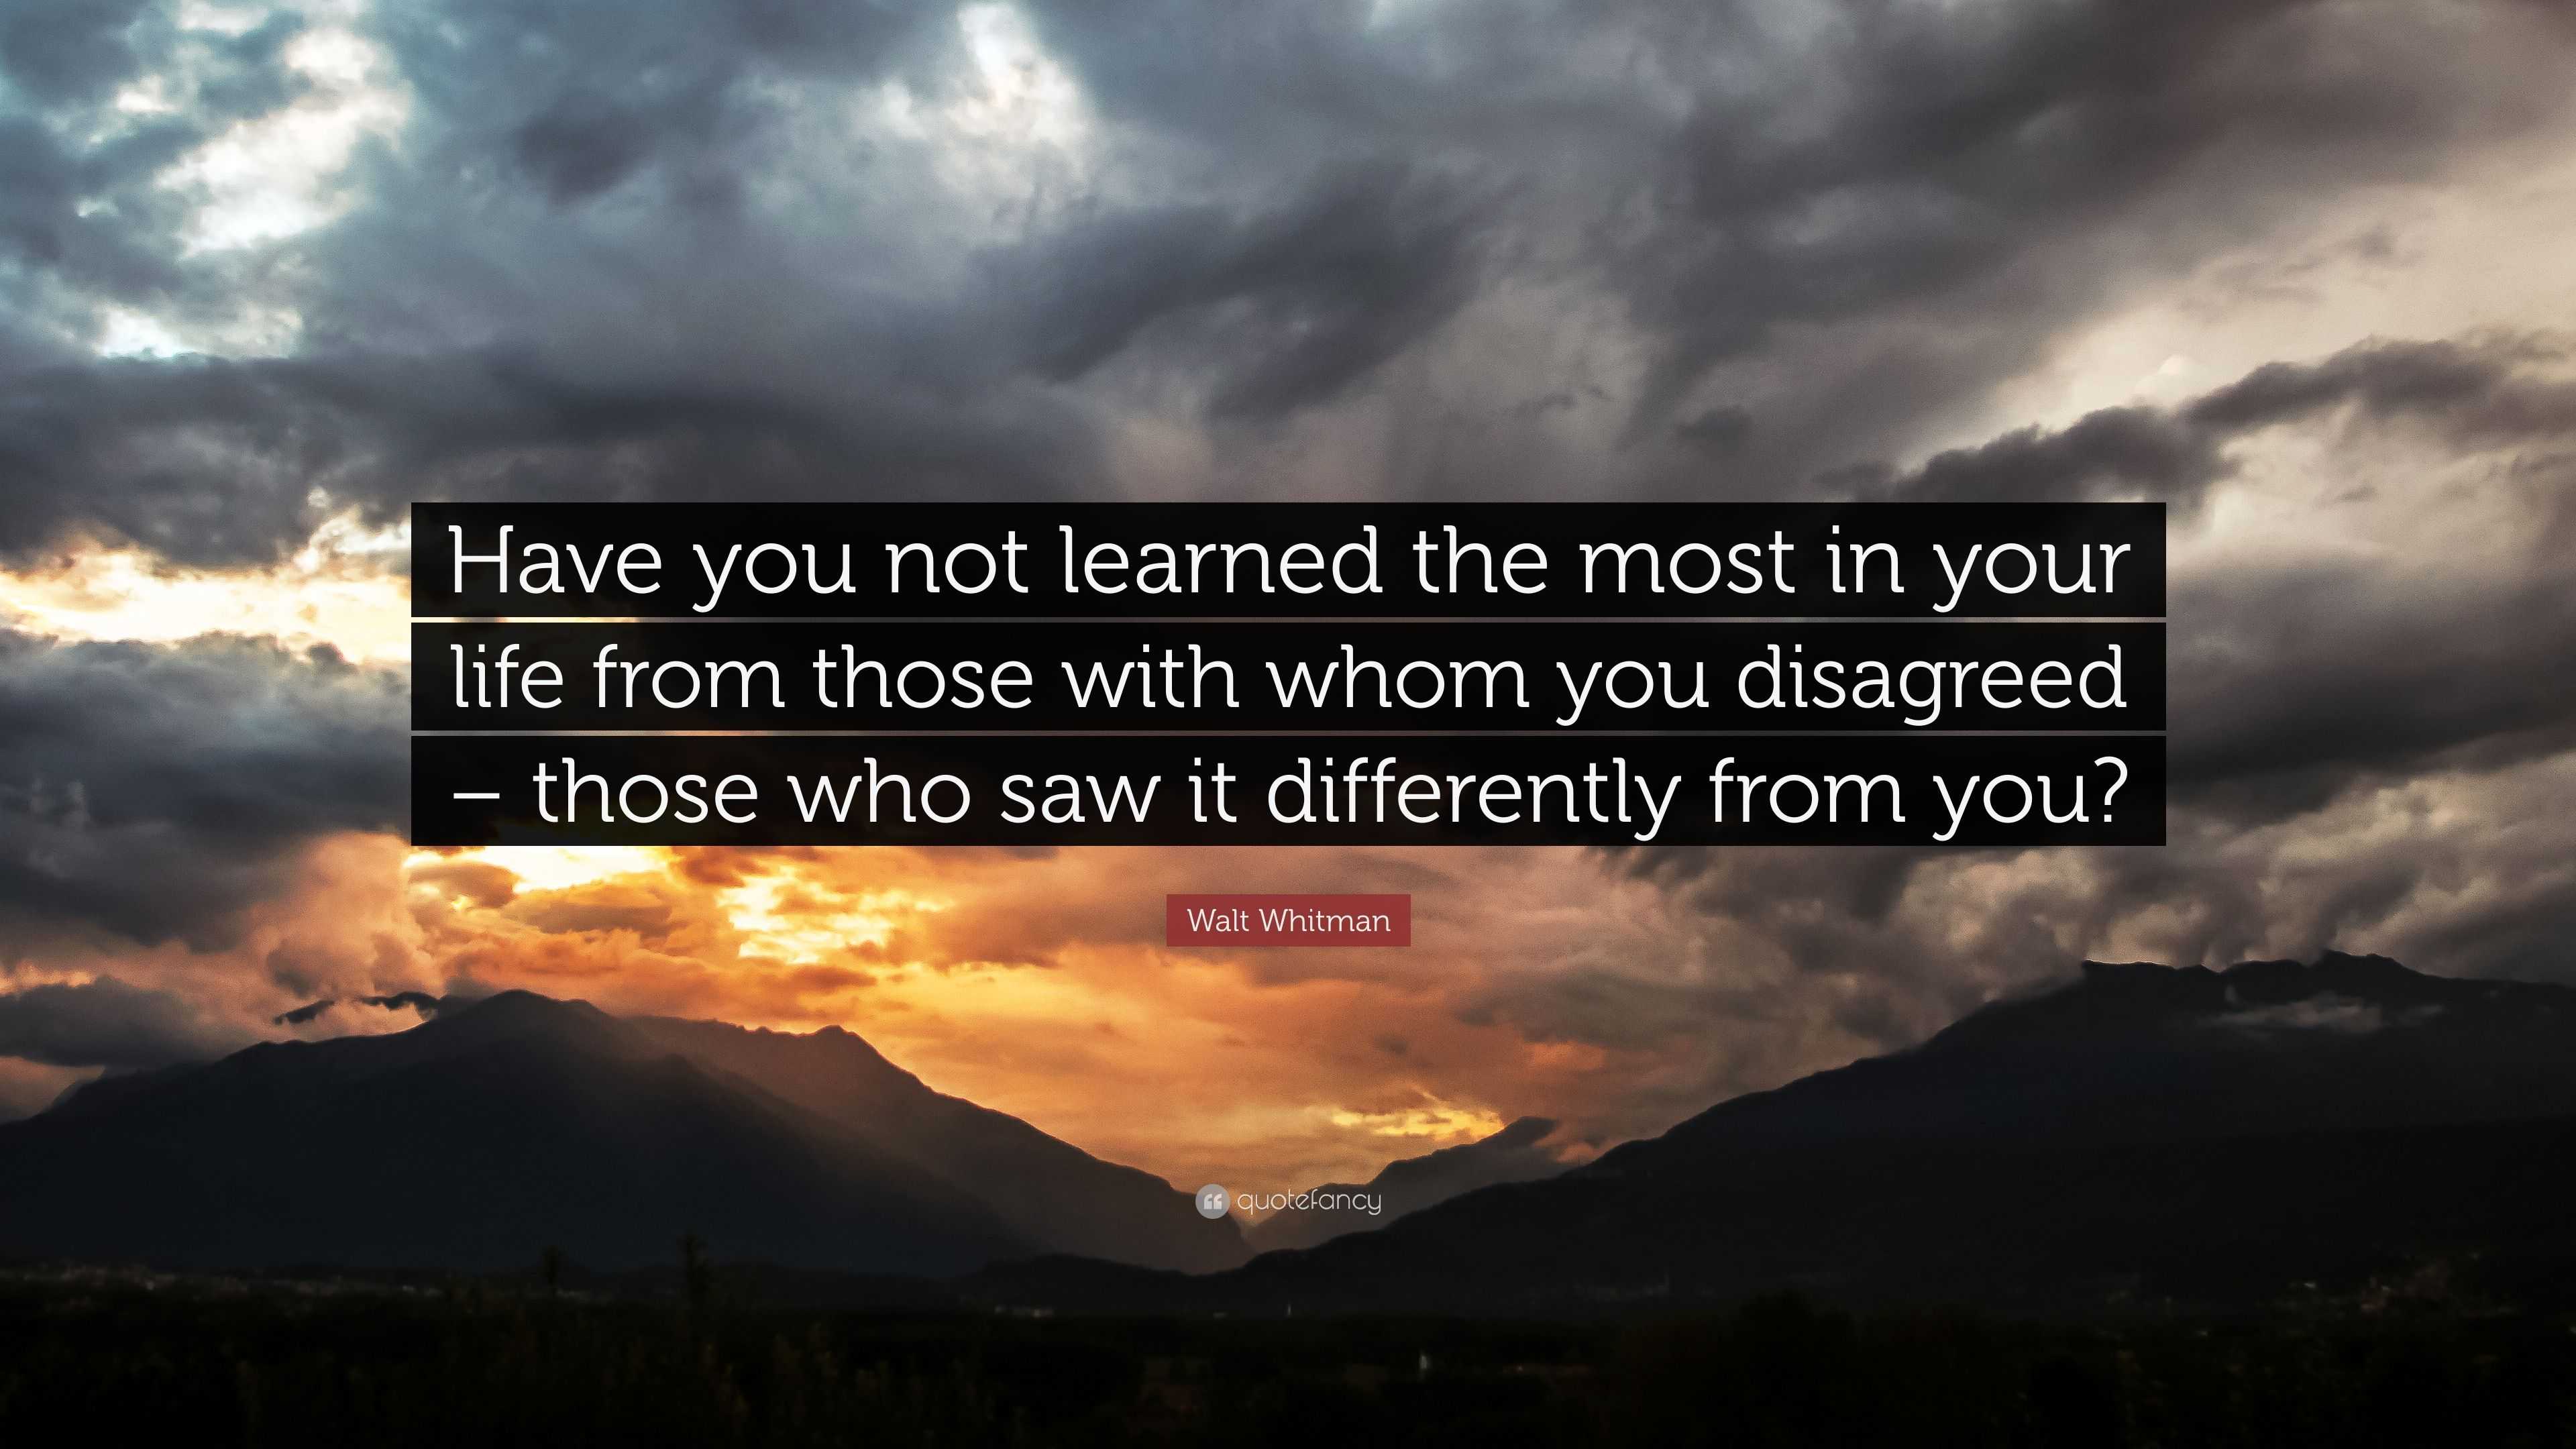 Walt Whitman Quote “have You Not Learned The Most In Your